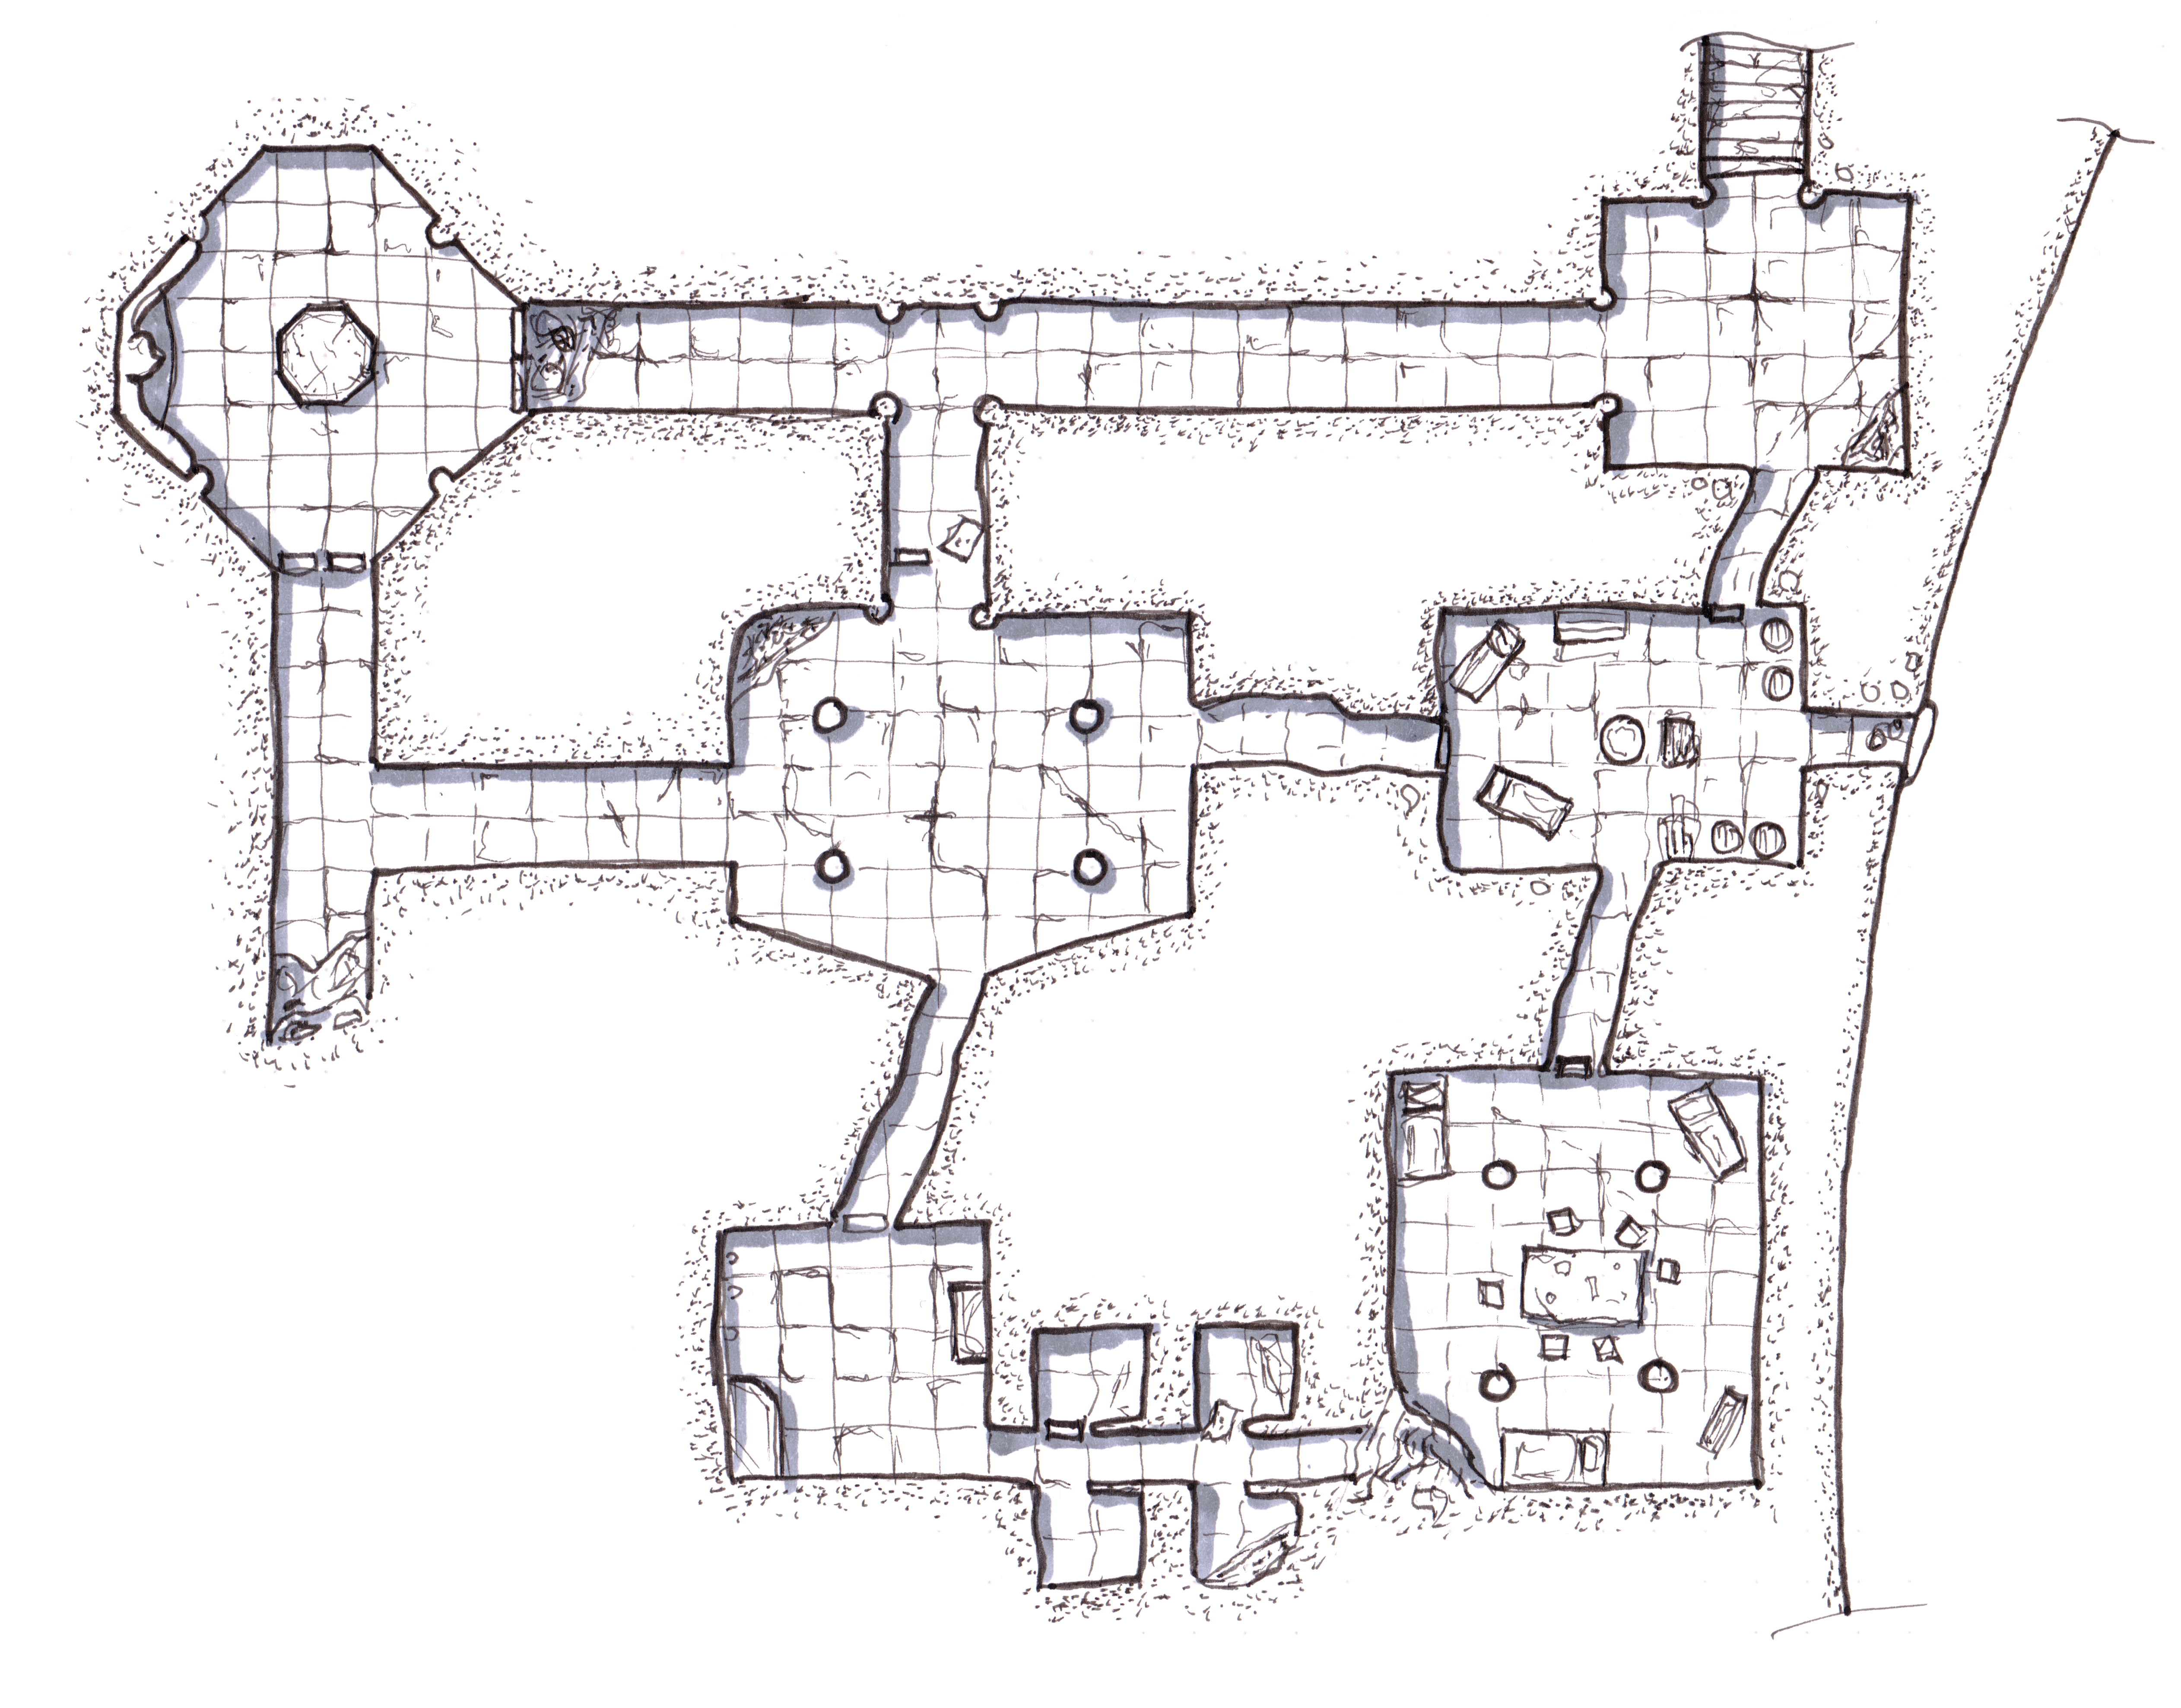 The lower level of the dungeon. Drawn by hand on paper, scanned and cleaned a bit digitally.